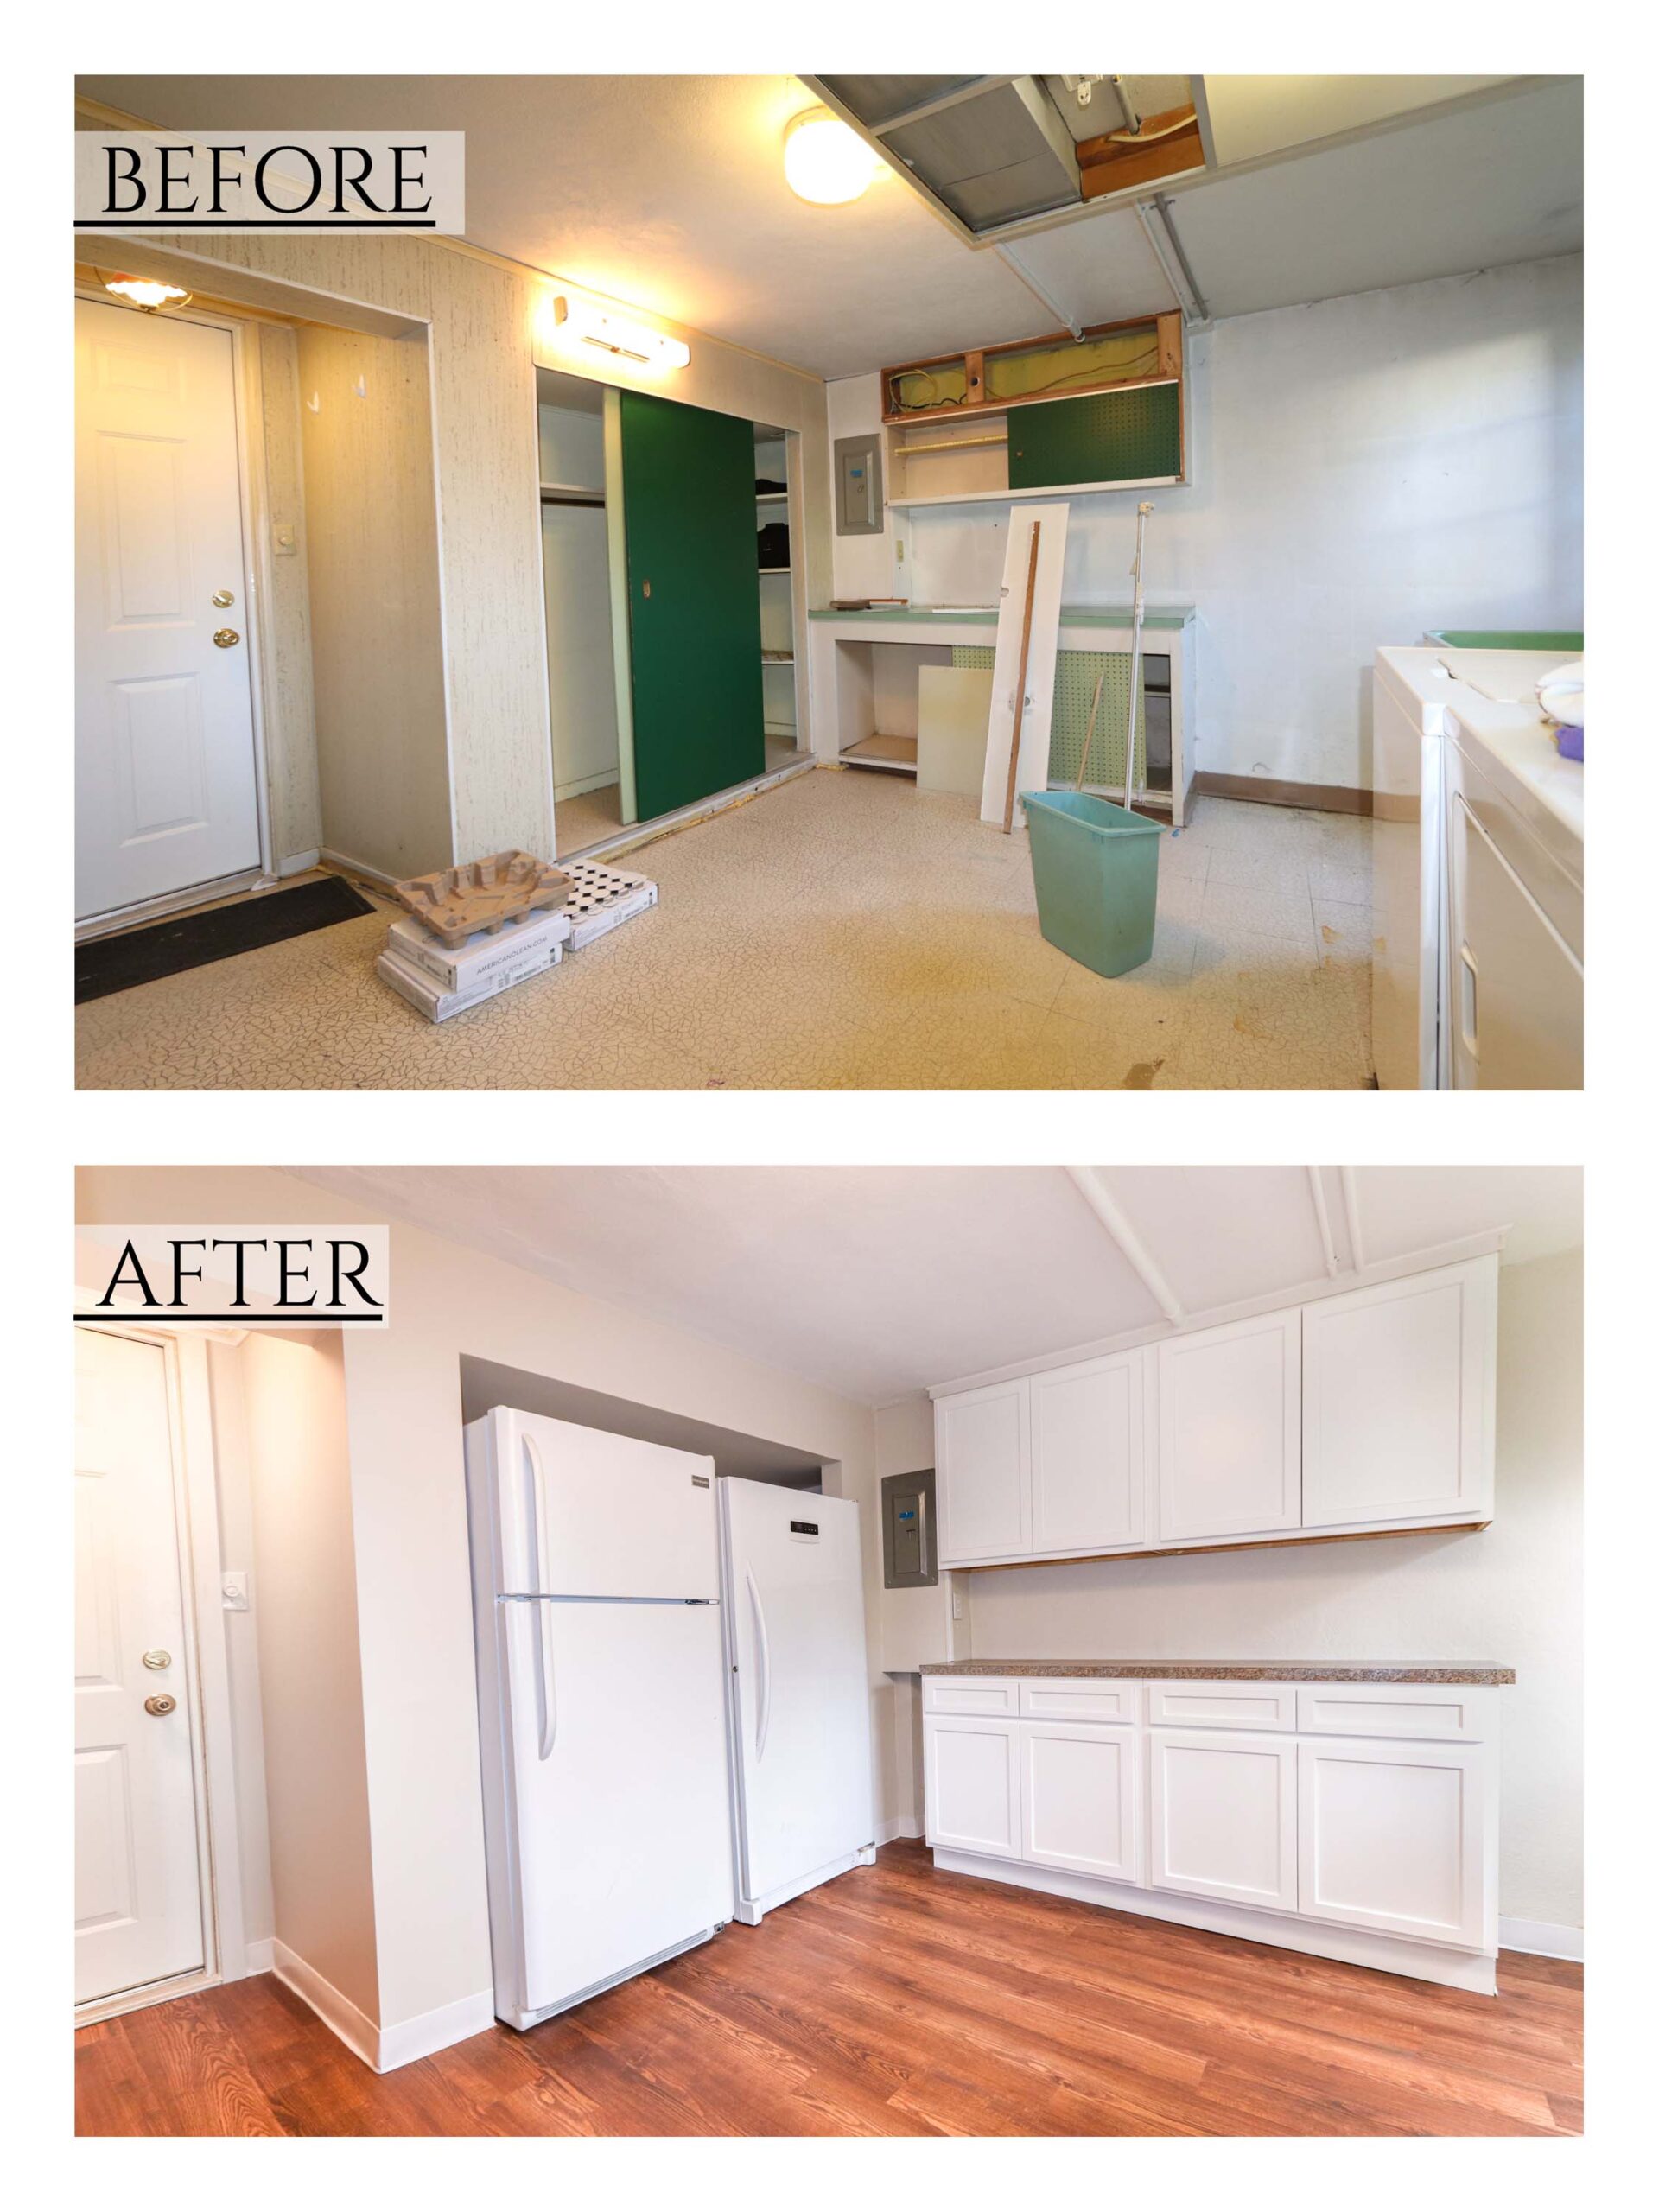 Before and after pictures of residential laundry room & bathroom remodel